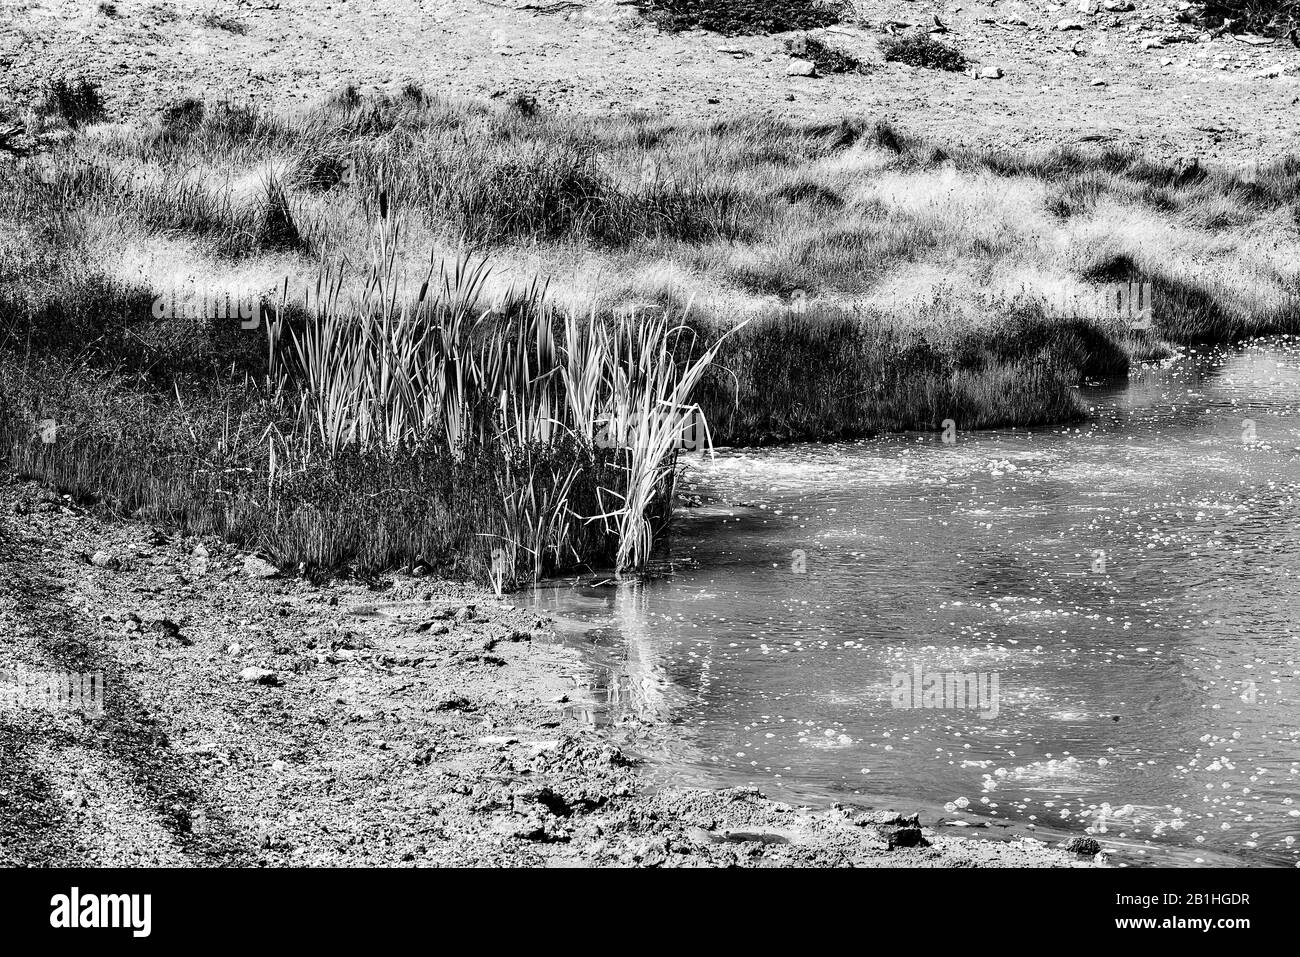 Muddy hot spring bubbling with vegetation growing near by and field beyond. Stock Photo